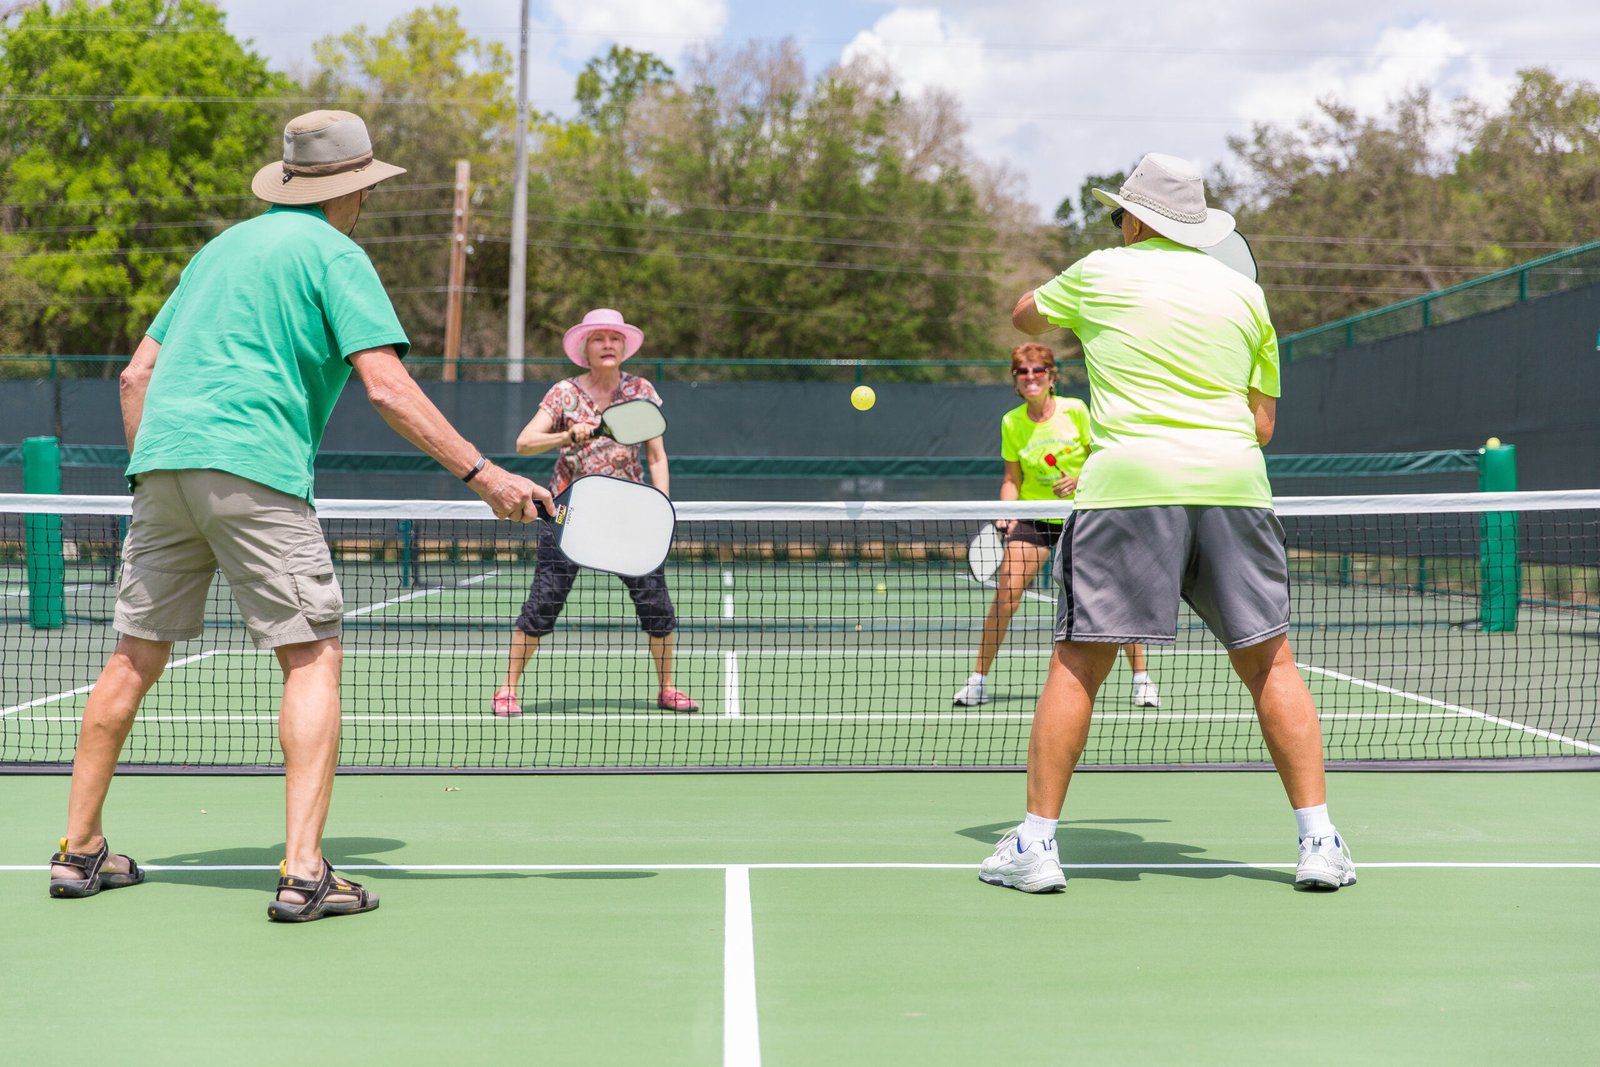 The Environmental Impact of Pickleball: How to Play Responsibly